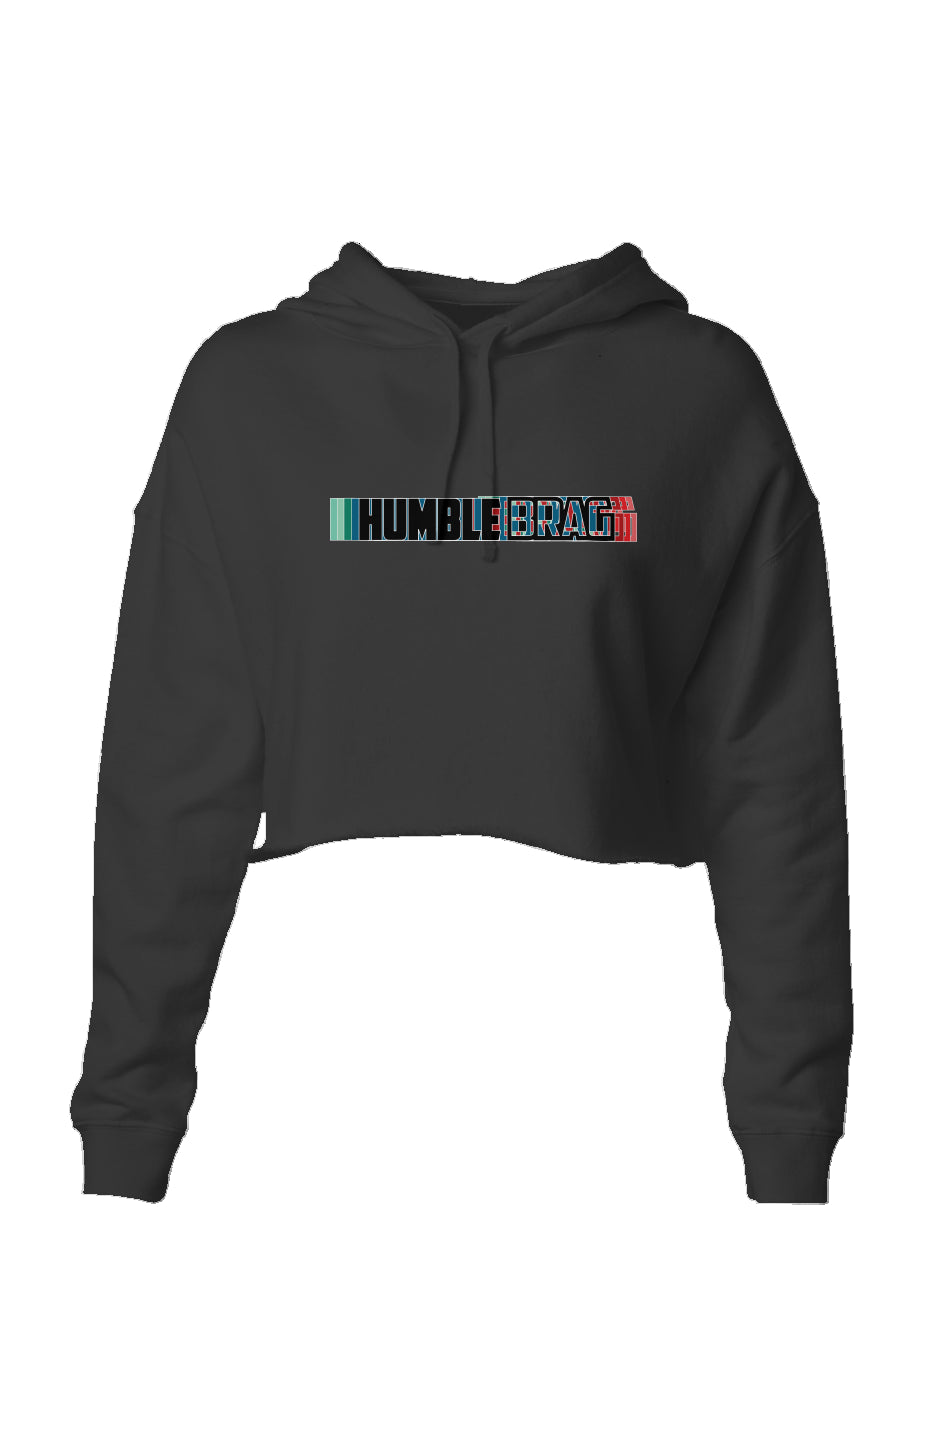 Products – Humble BRAG Apparel